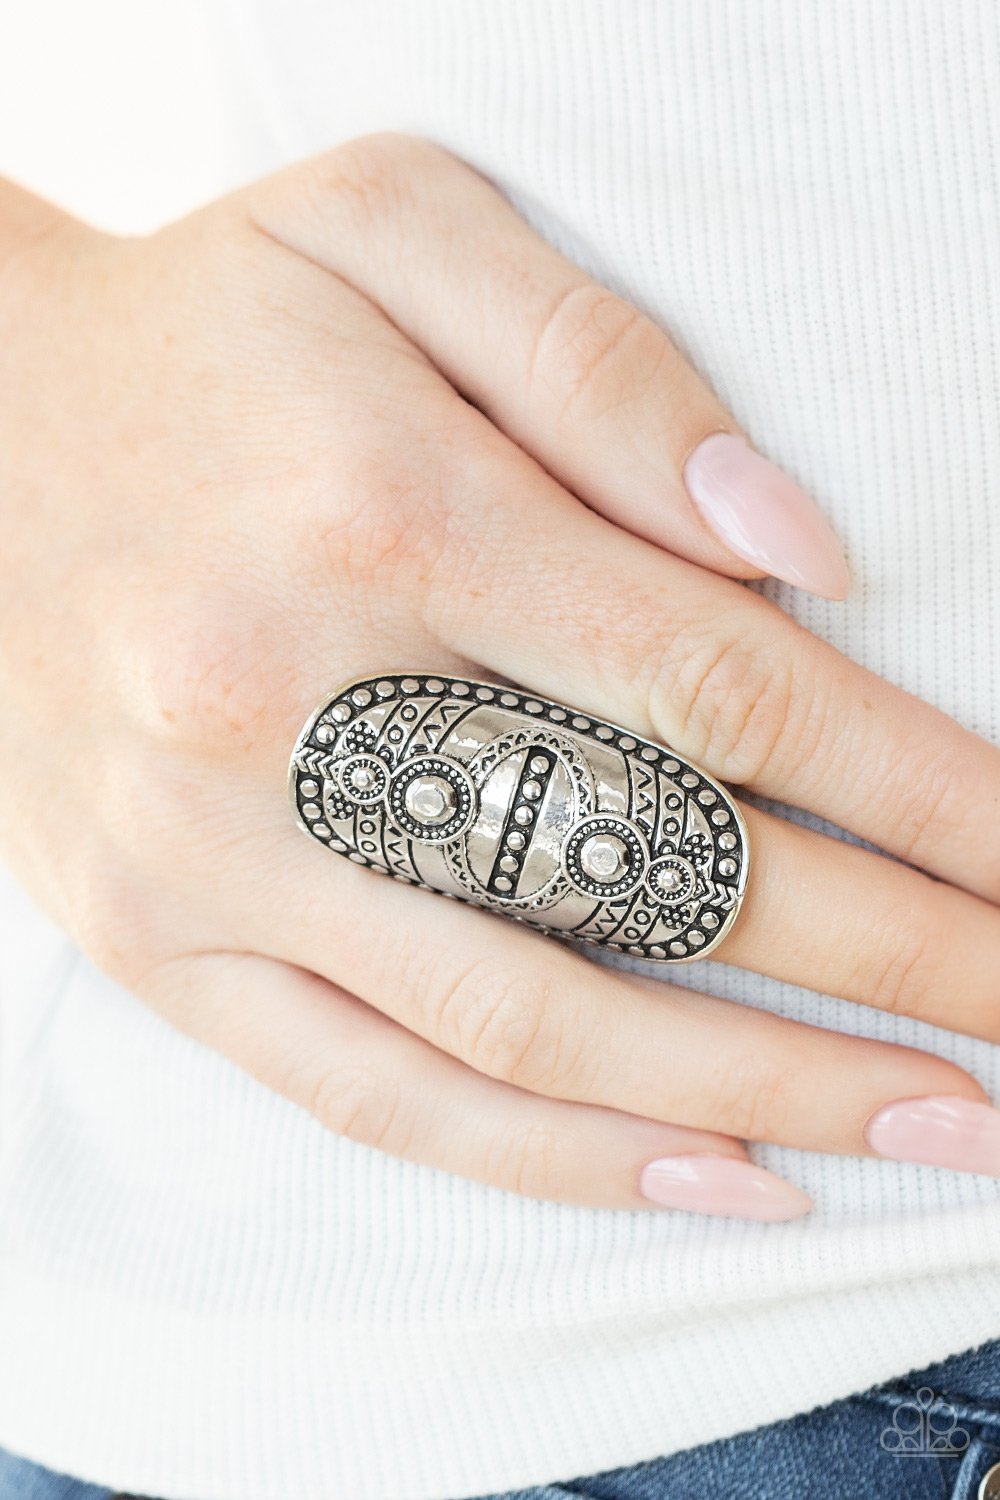 &lt;p&gt; Studded and stamped in tribal inspired textures, an oversized silver frame folds around the finger for a rustically authentic look. Features a stretchy band for a flexible fit.&lt;/p&gt;  
 

 &lt;p&gt; &lt;i&gt; Sold as one individual ring.
 &lt;/i&gt;&lt;/p&gt;
 

&lt;h5&gt;Paparazzi Accessories • $5 Jewelry&lt;/h5&gt;